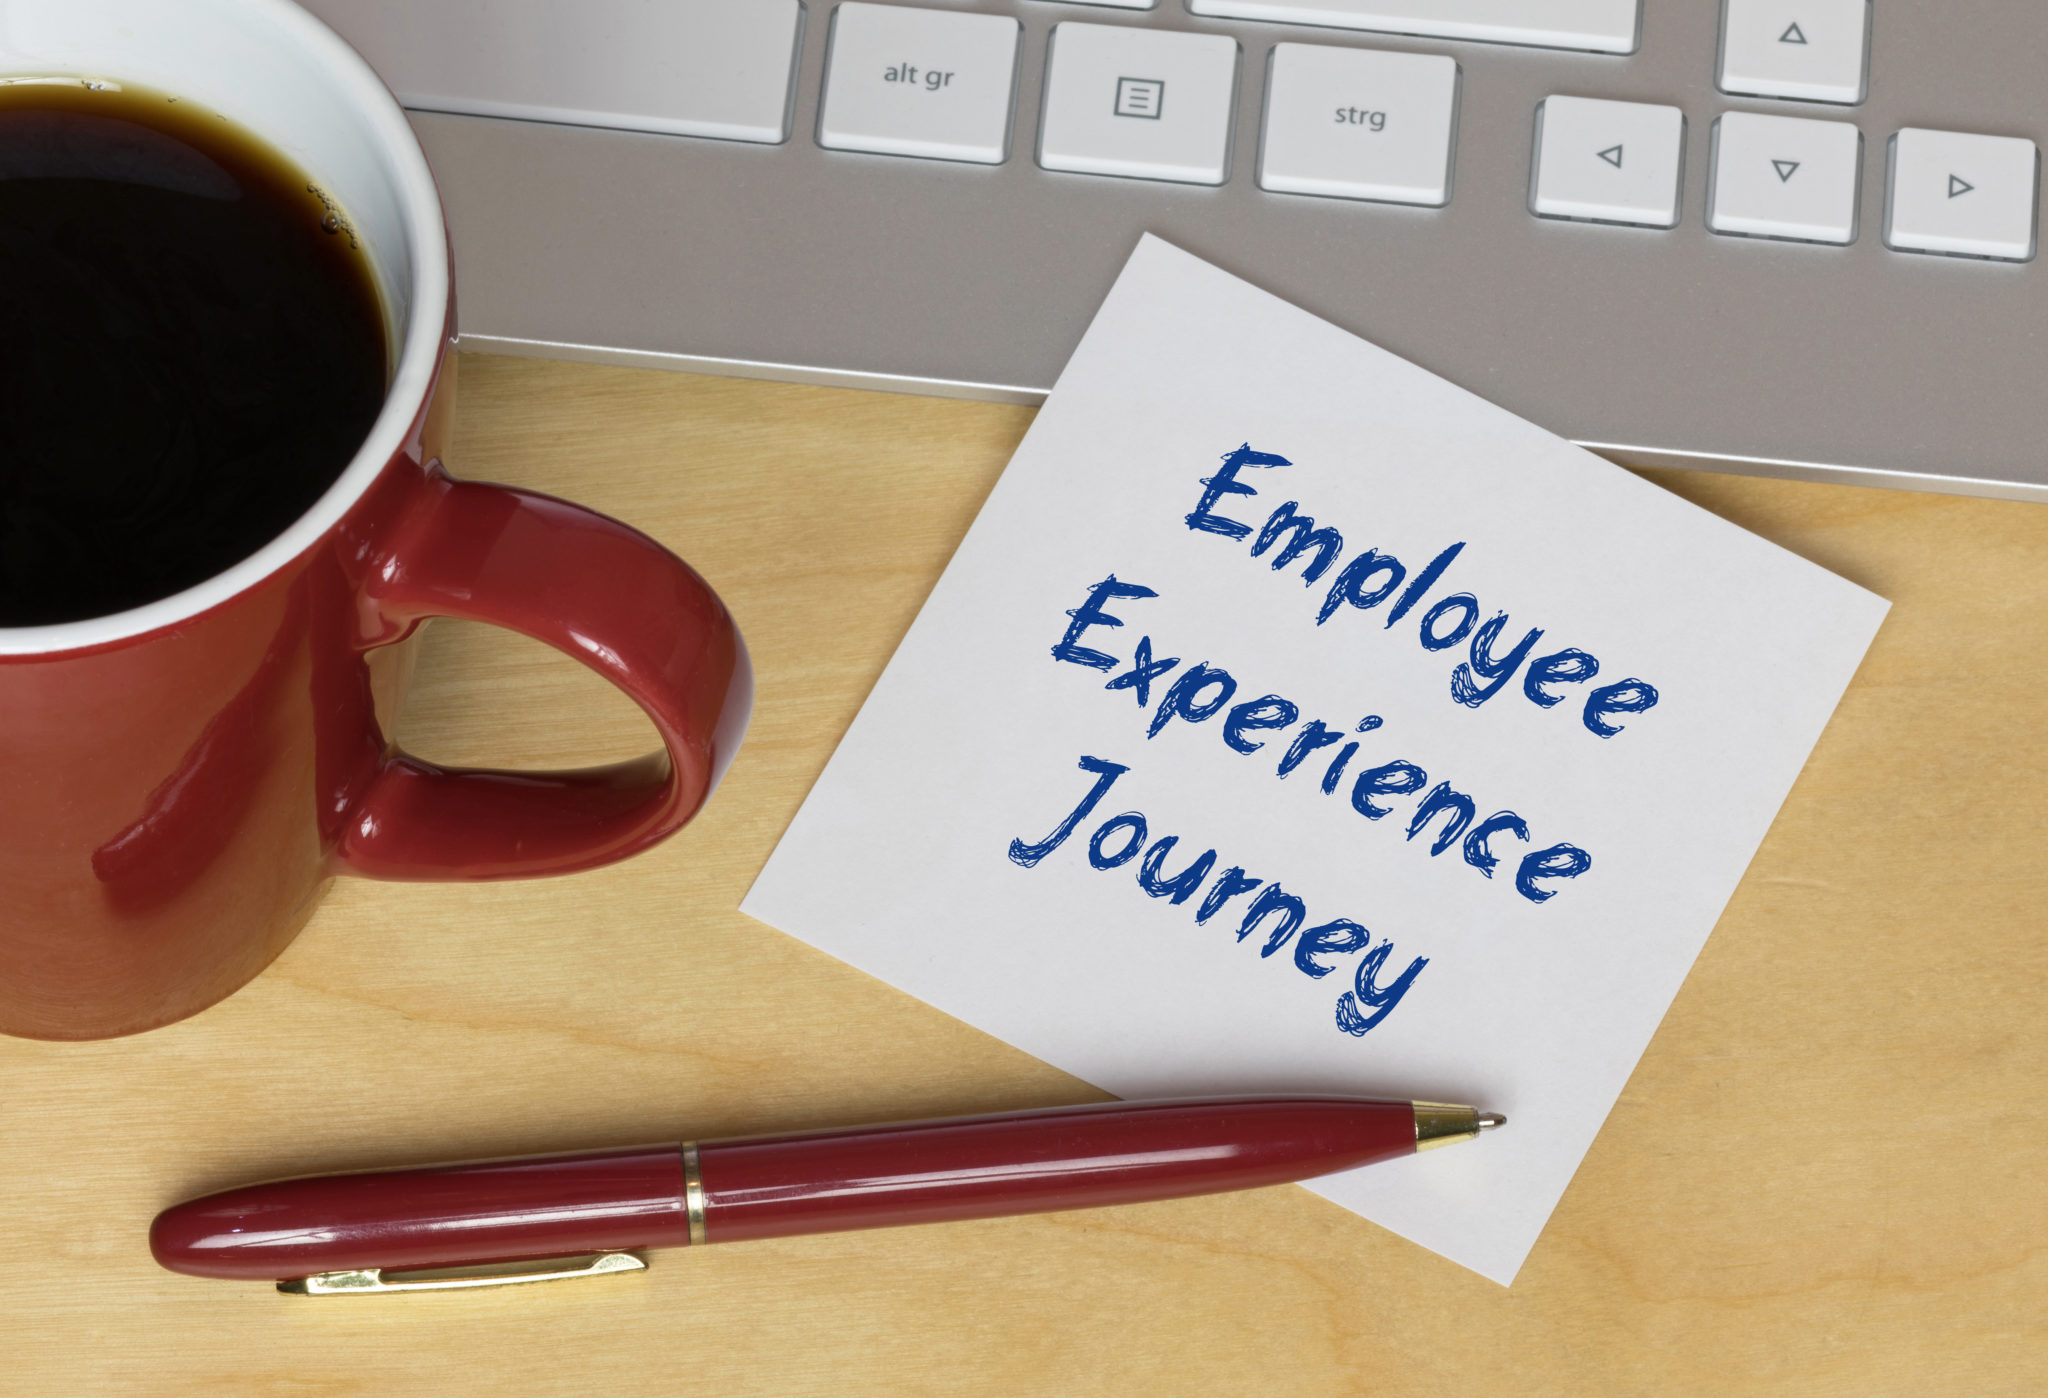 Digital Transformation and Employee Experience